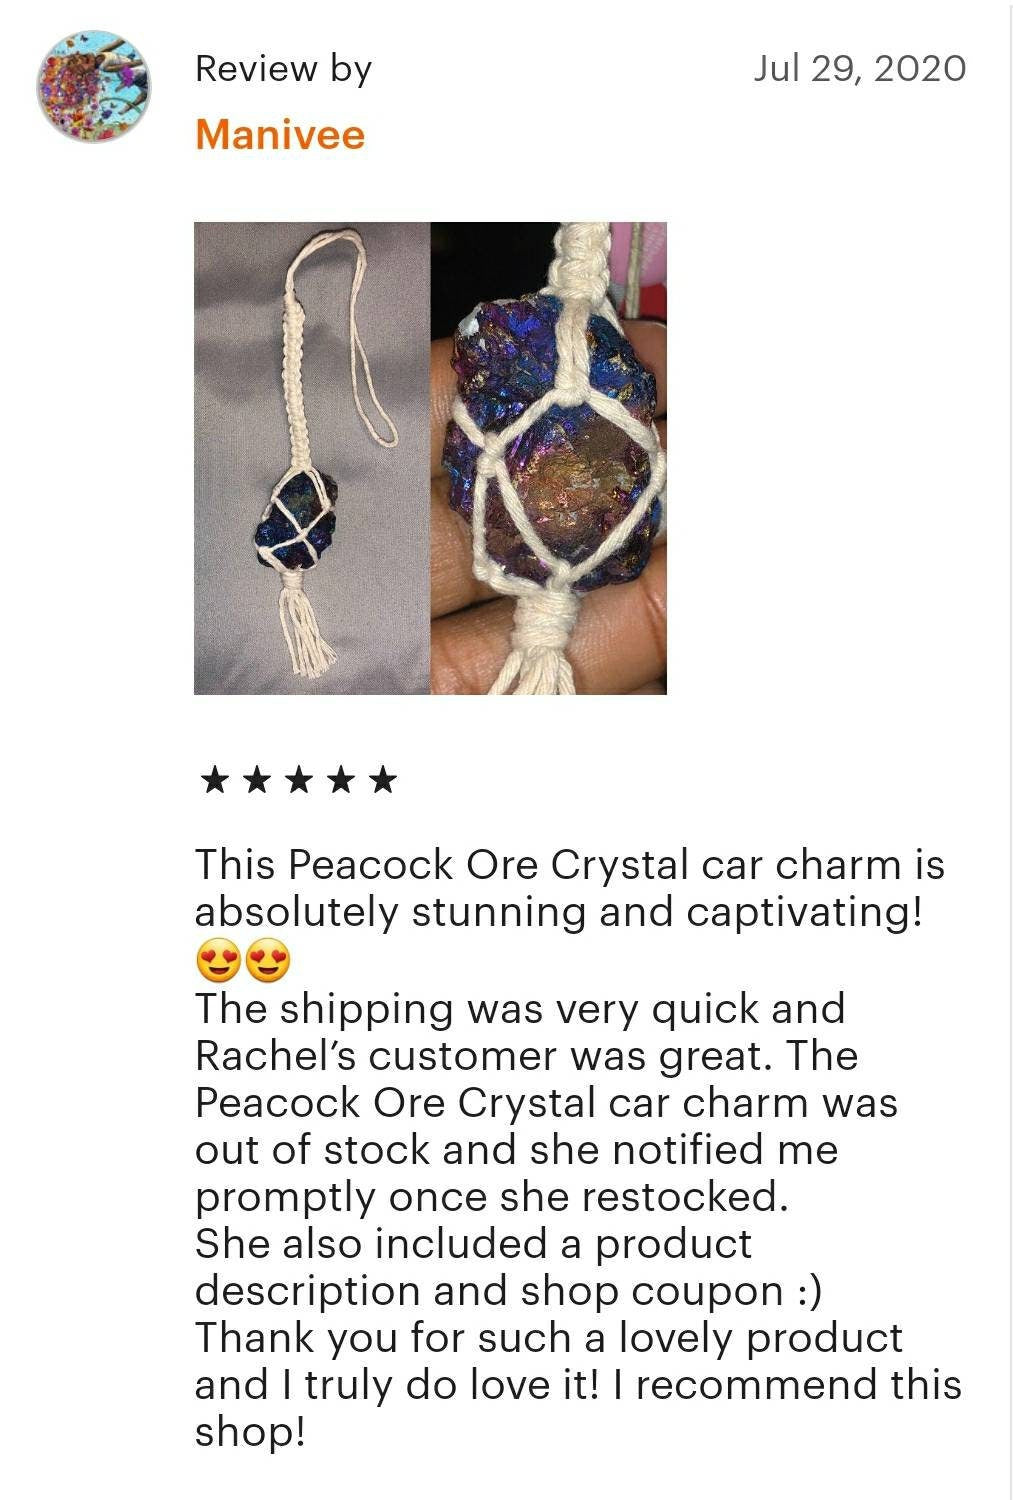 Crystal rear view mirror charm. Car accessories, macrame mirror hangers, metaphysical gifts and crystal accessories. Stocking stuffers